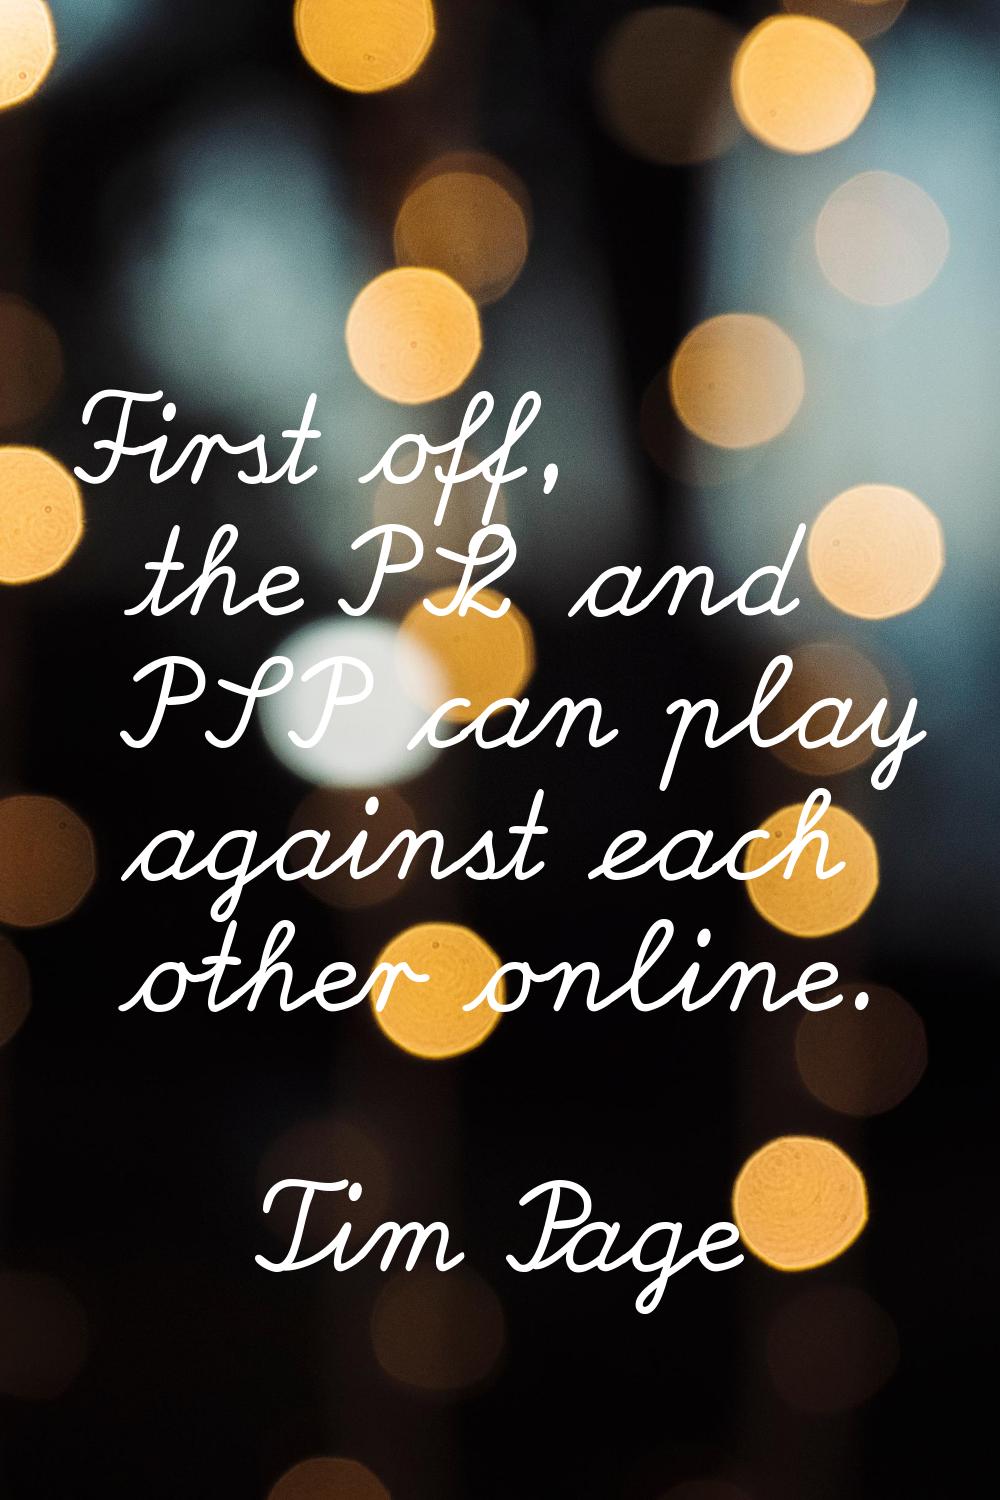 First off, the PS2 and PSP can play against each other online.